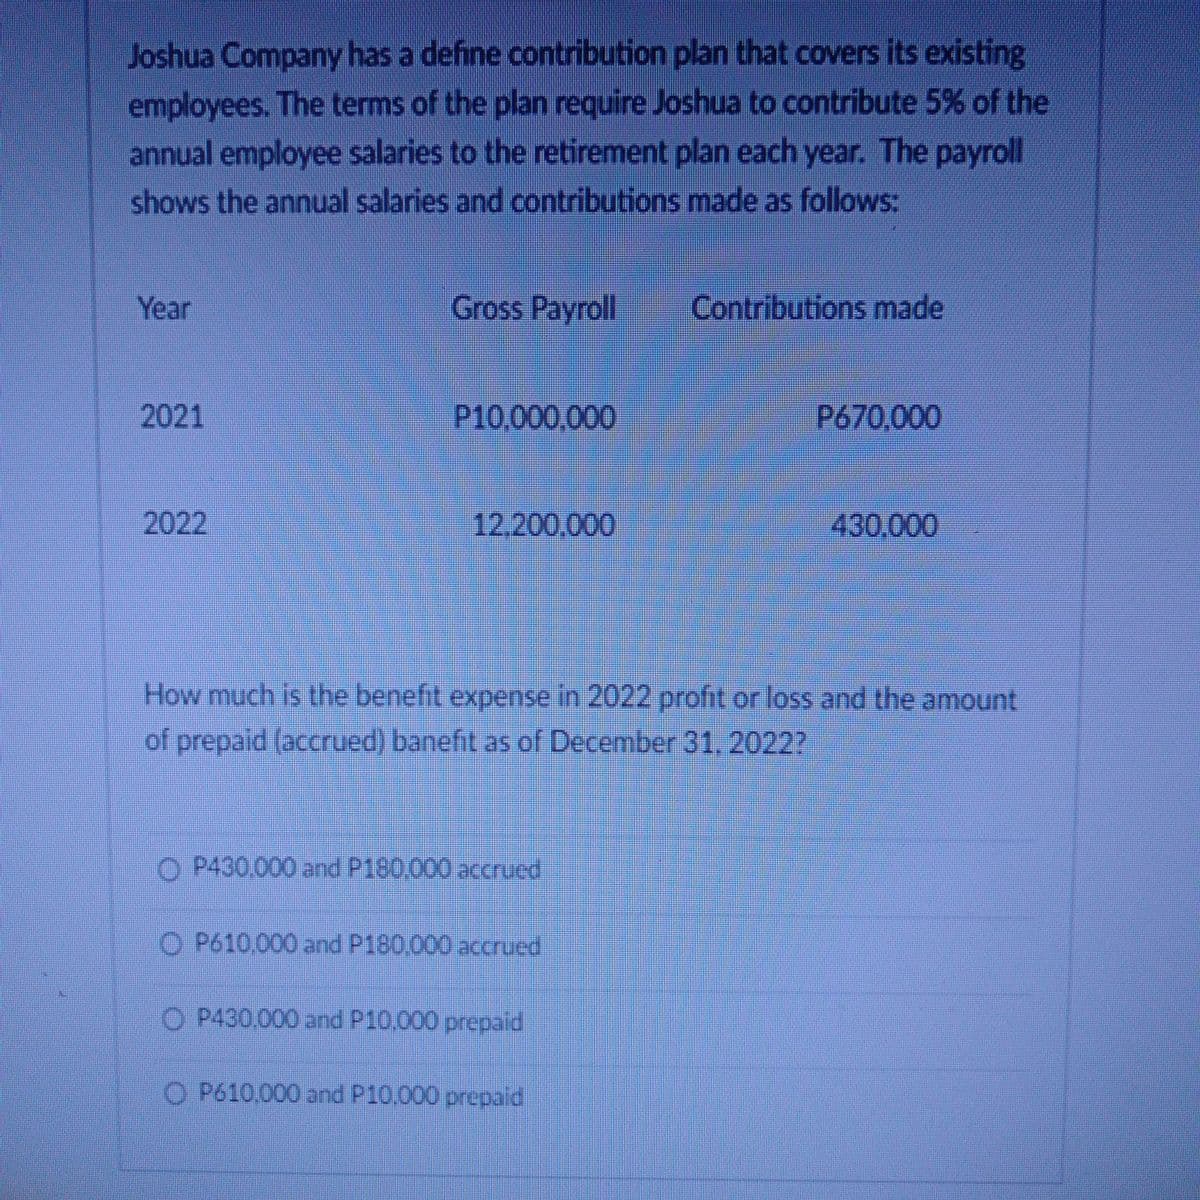 Joshua Company has a define contribution plan that covers its existing
employees. The terms of the plan require Joshua to contribute 5% of the
annual employee salaries to the retirement plan each year. The payroll
shows the annual salaries and contributions made as follows:
Year
Gross Payroll
Contributions made
2021
P10,000,000
P670,000
2022
12,200,000
430,000
How much is the benefit expense in 2022 profit or loss and the amount
of prepaid (accrued) banefit as of December 31.2022?
O P430.000 and P180,000 accrued
O P610,000 and P180,000 accrued
O P430,000 and P10,000 prepaid
O P610.000 and P10.000 prepaid
